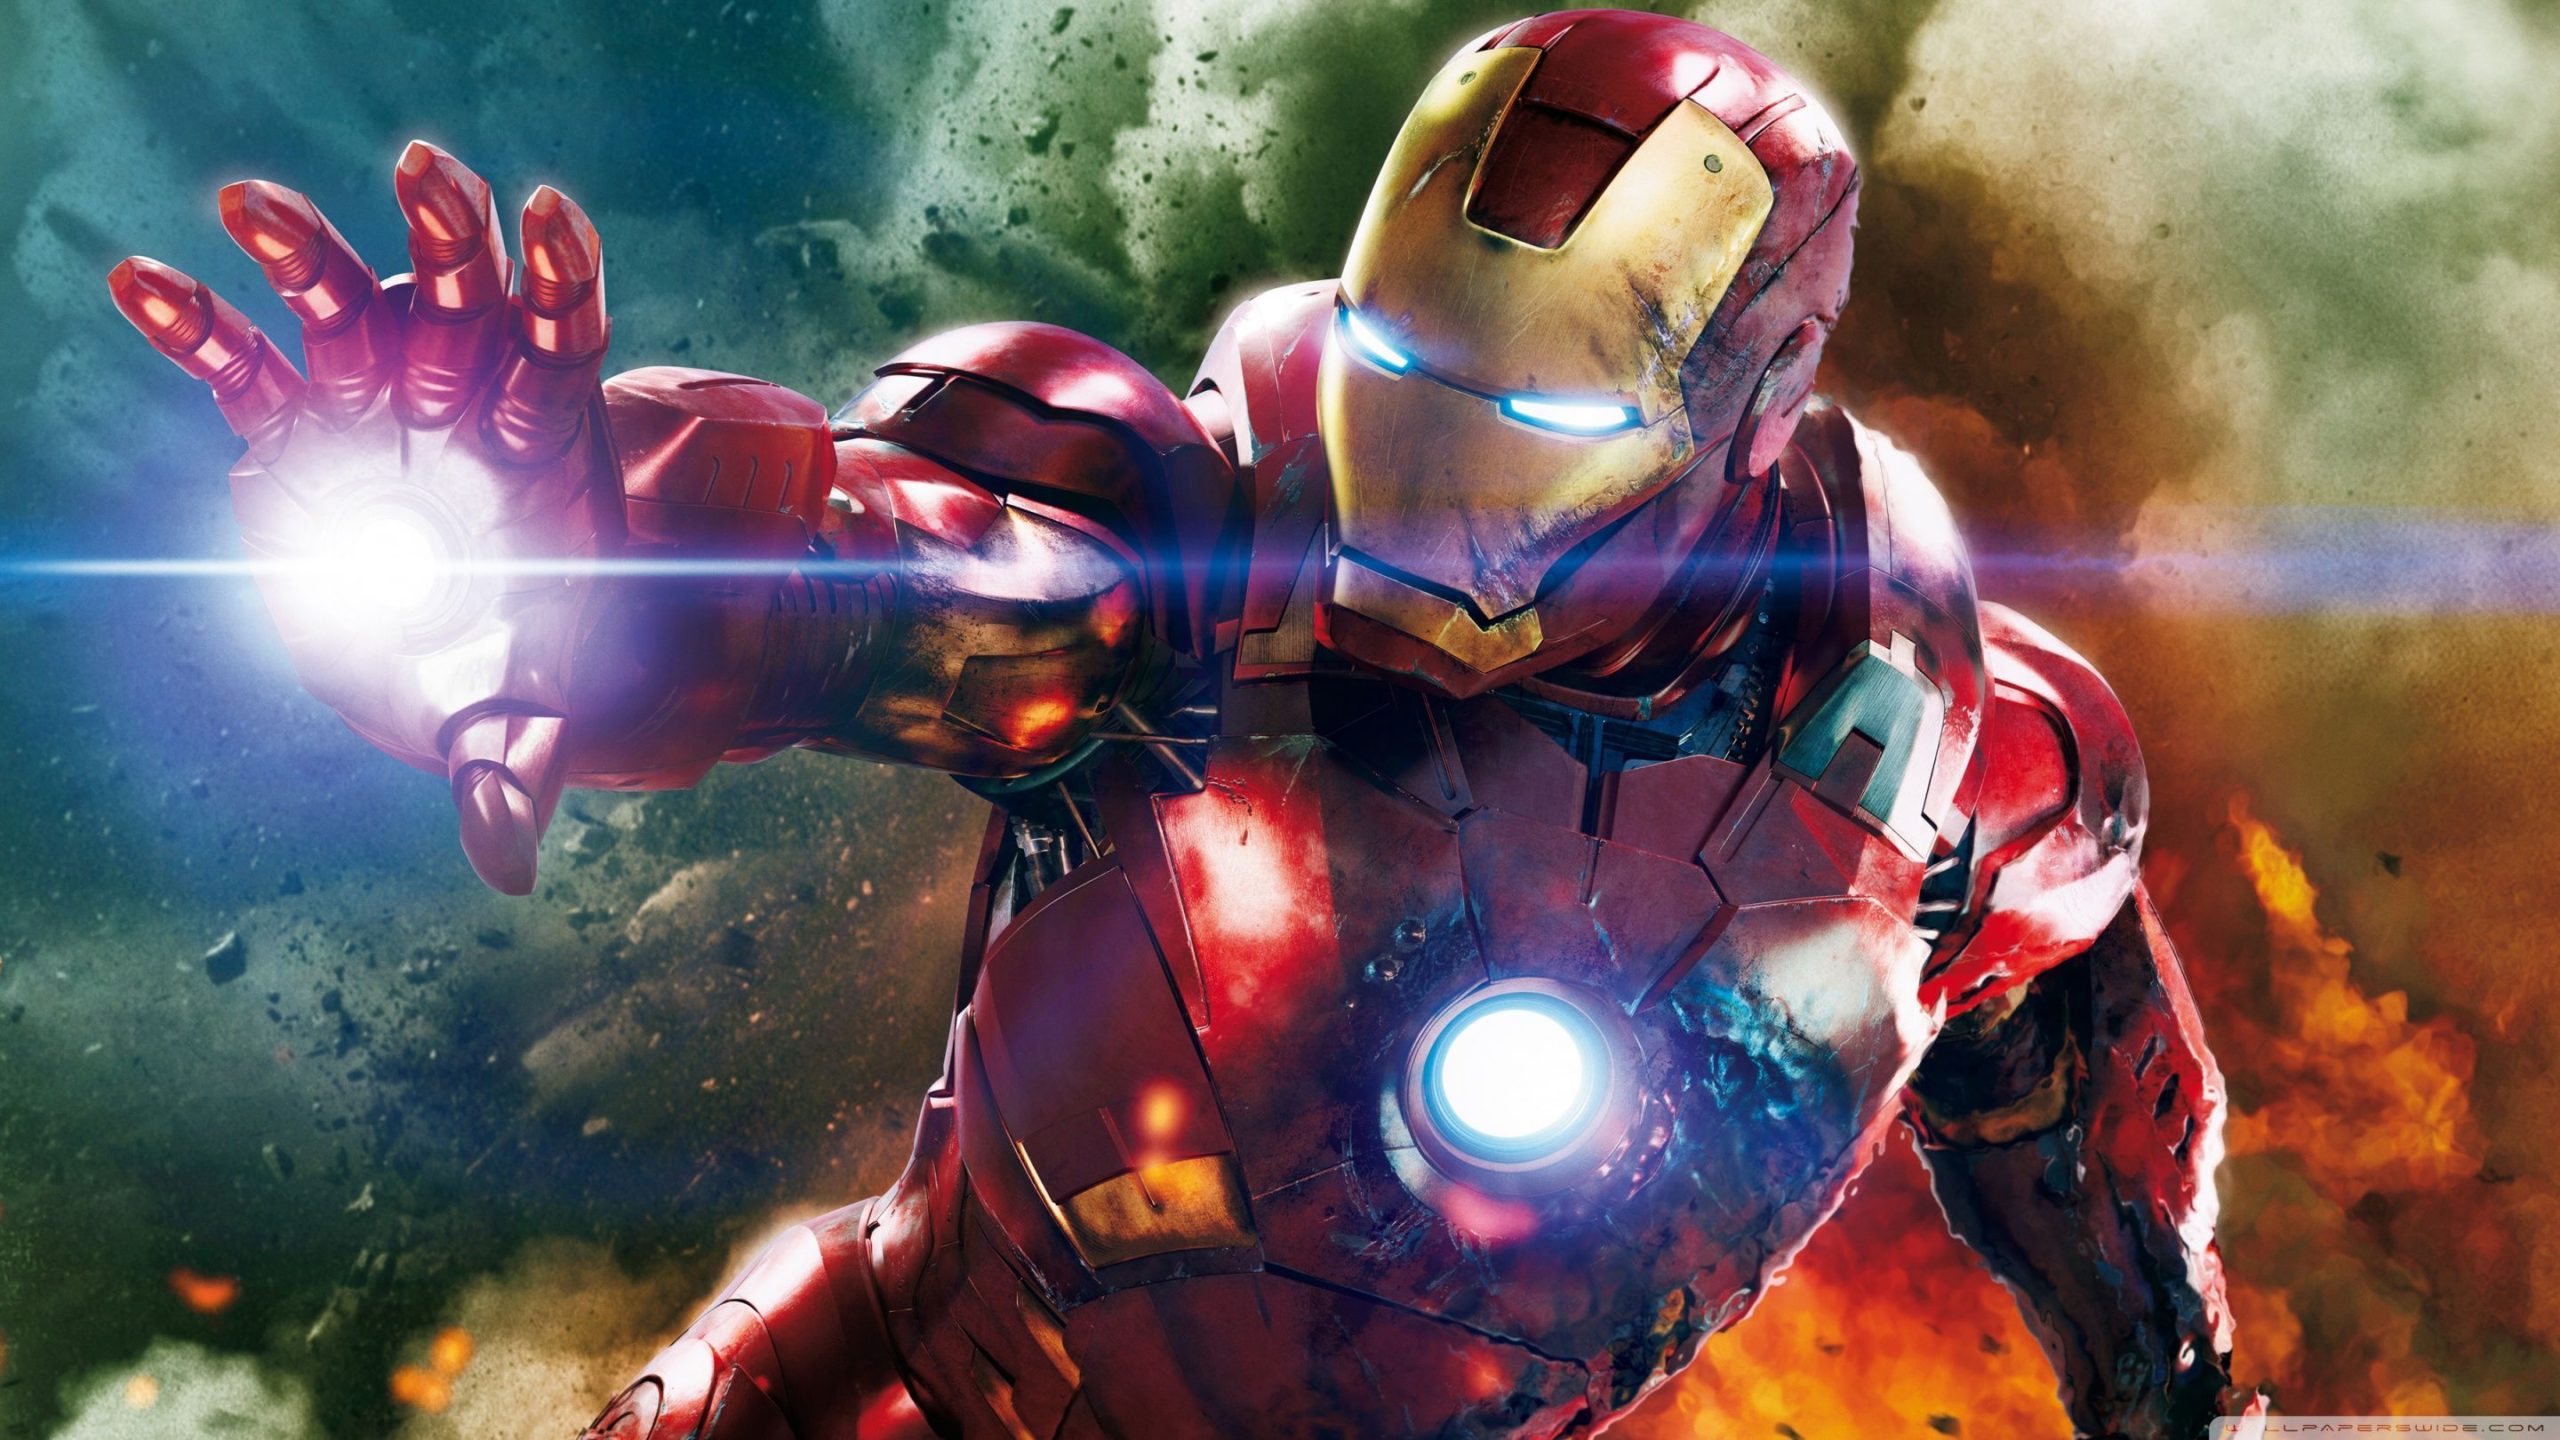 Top iron man 4k wallpaper for pc HD Download Book Source for free download HD, 4K & high quality wallpaper